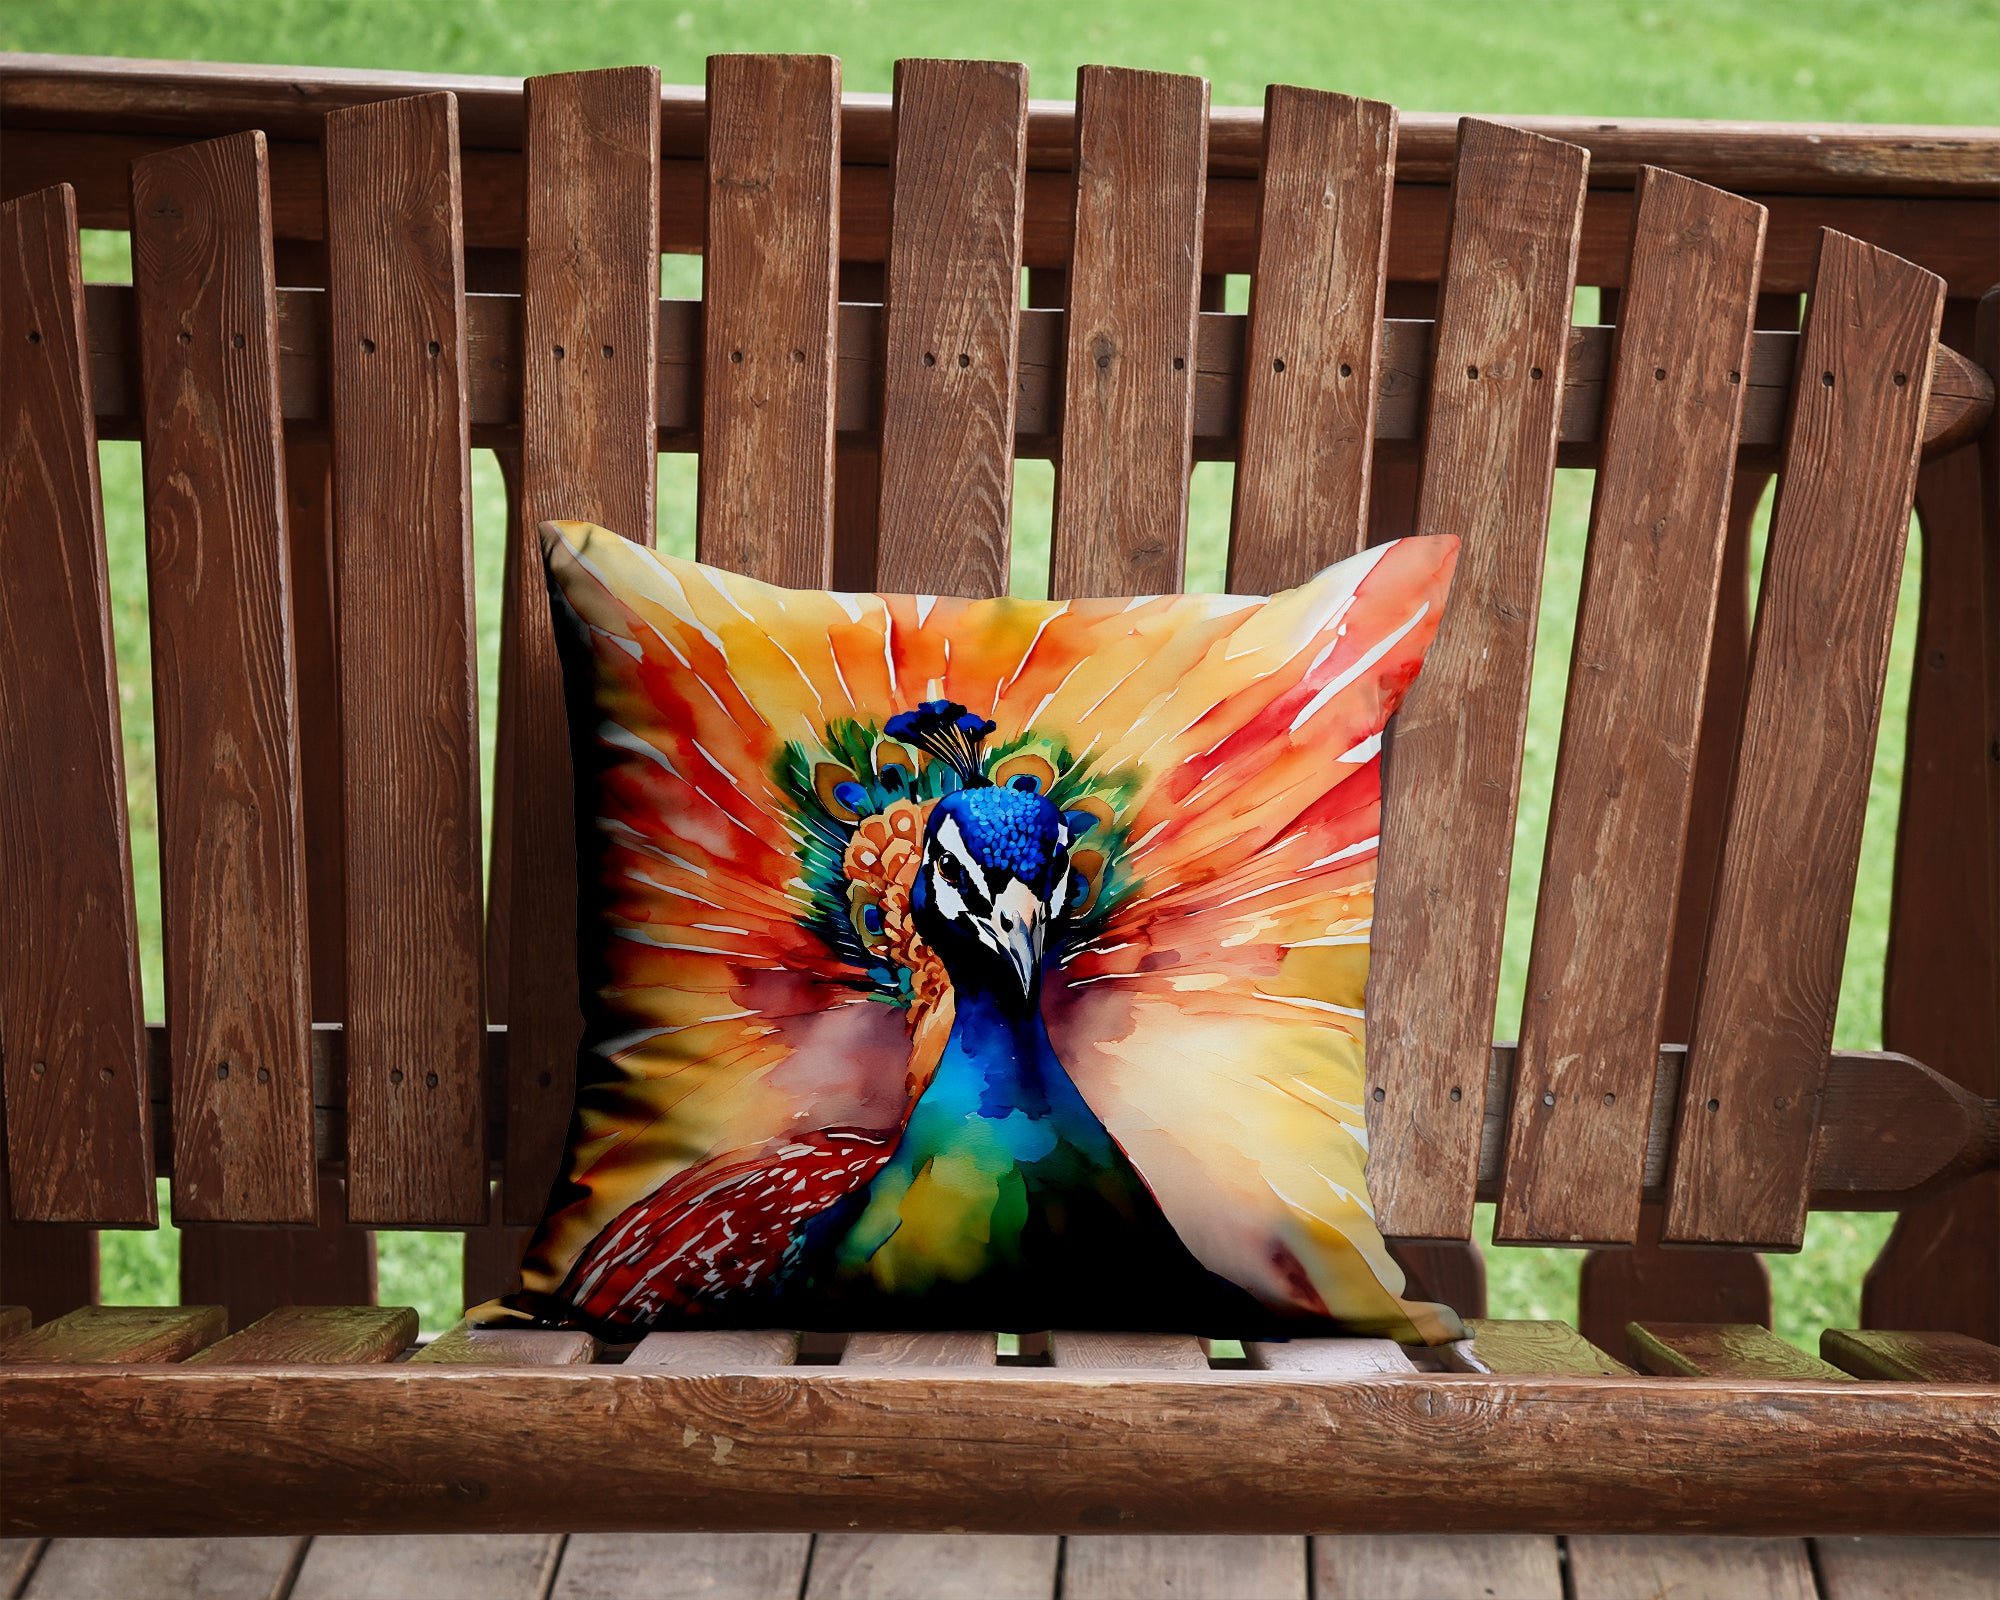 Buy this Peacock Throw Pillow